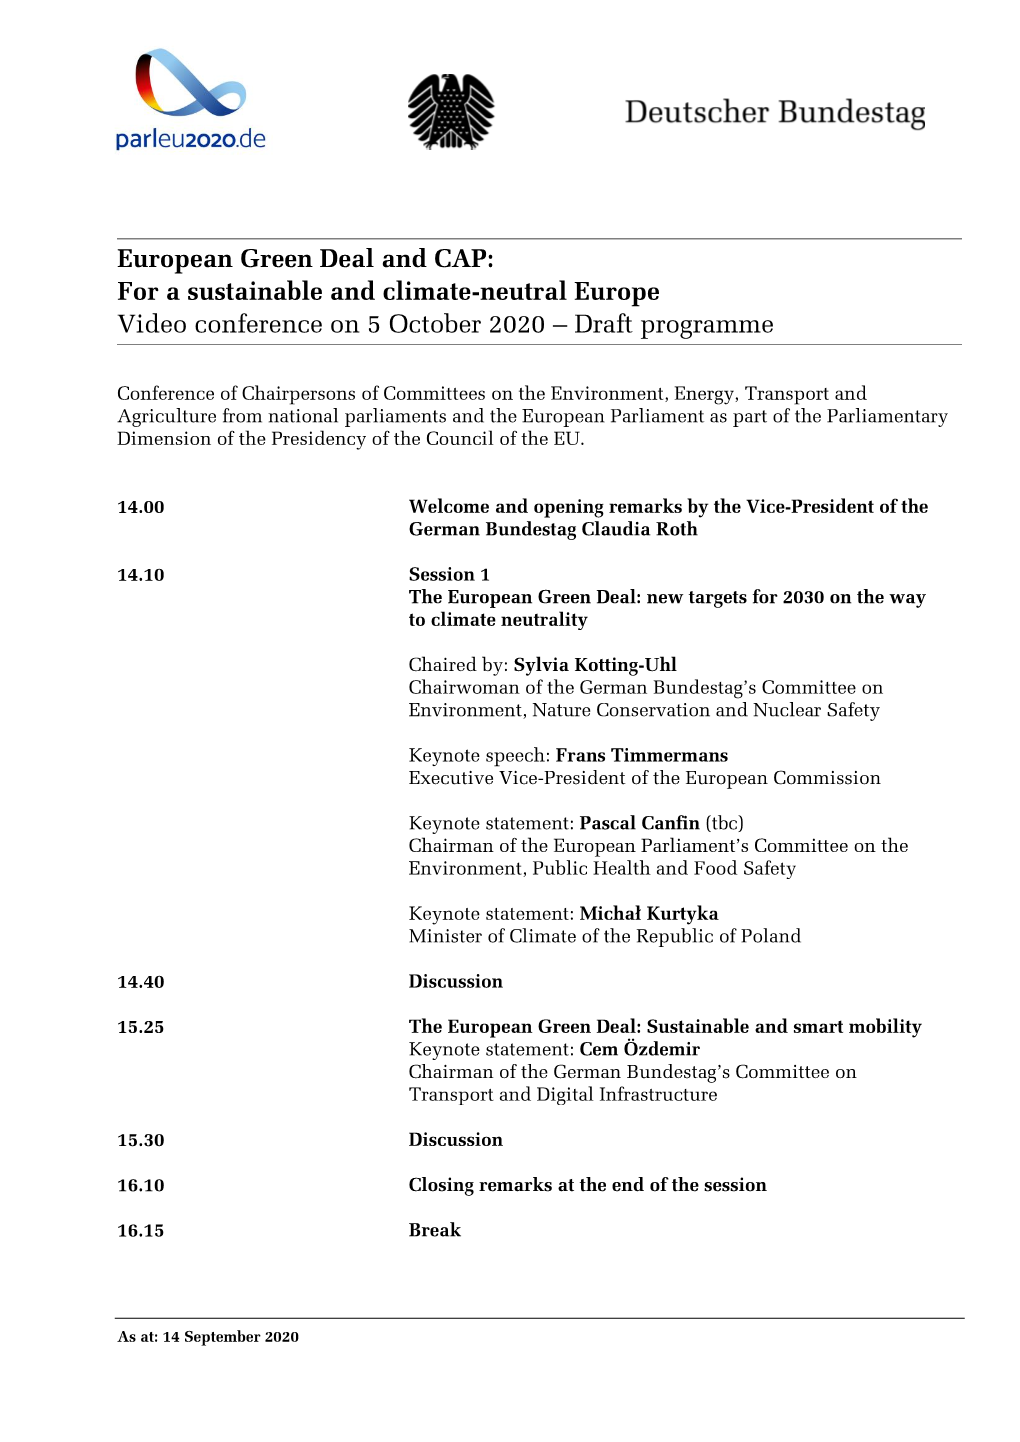 European Green Deal and CAP: for a Sustainable and Climate-Neutral Europe Video Conference on 5 October 2020 – Draft Programme